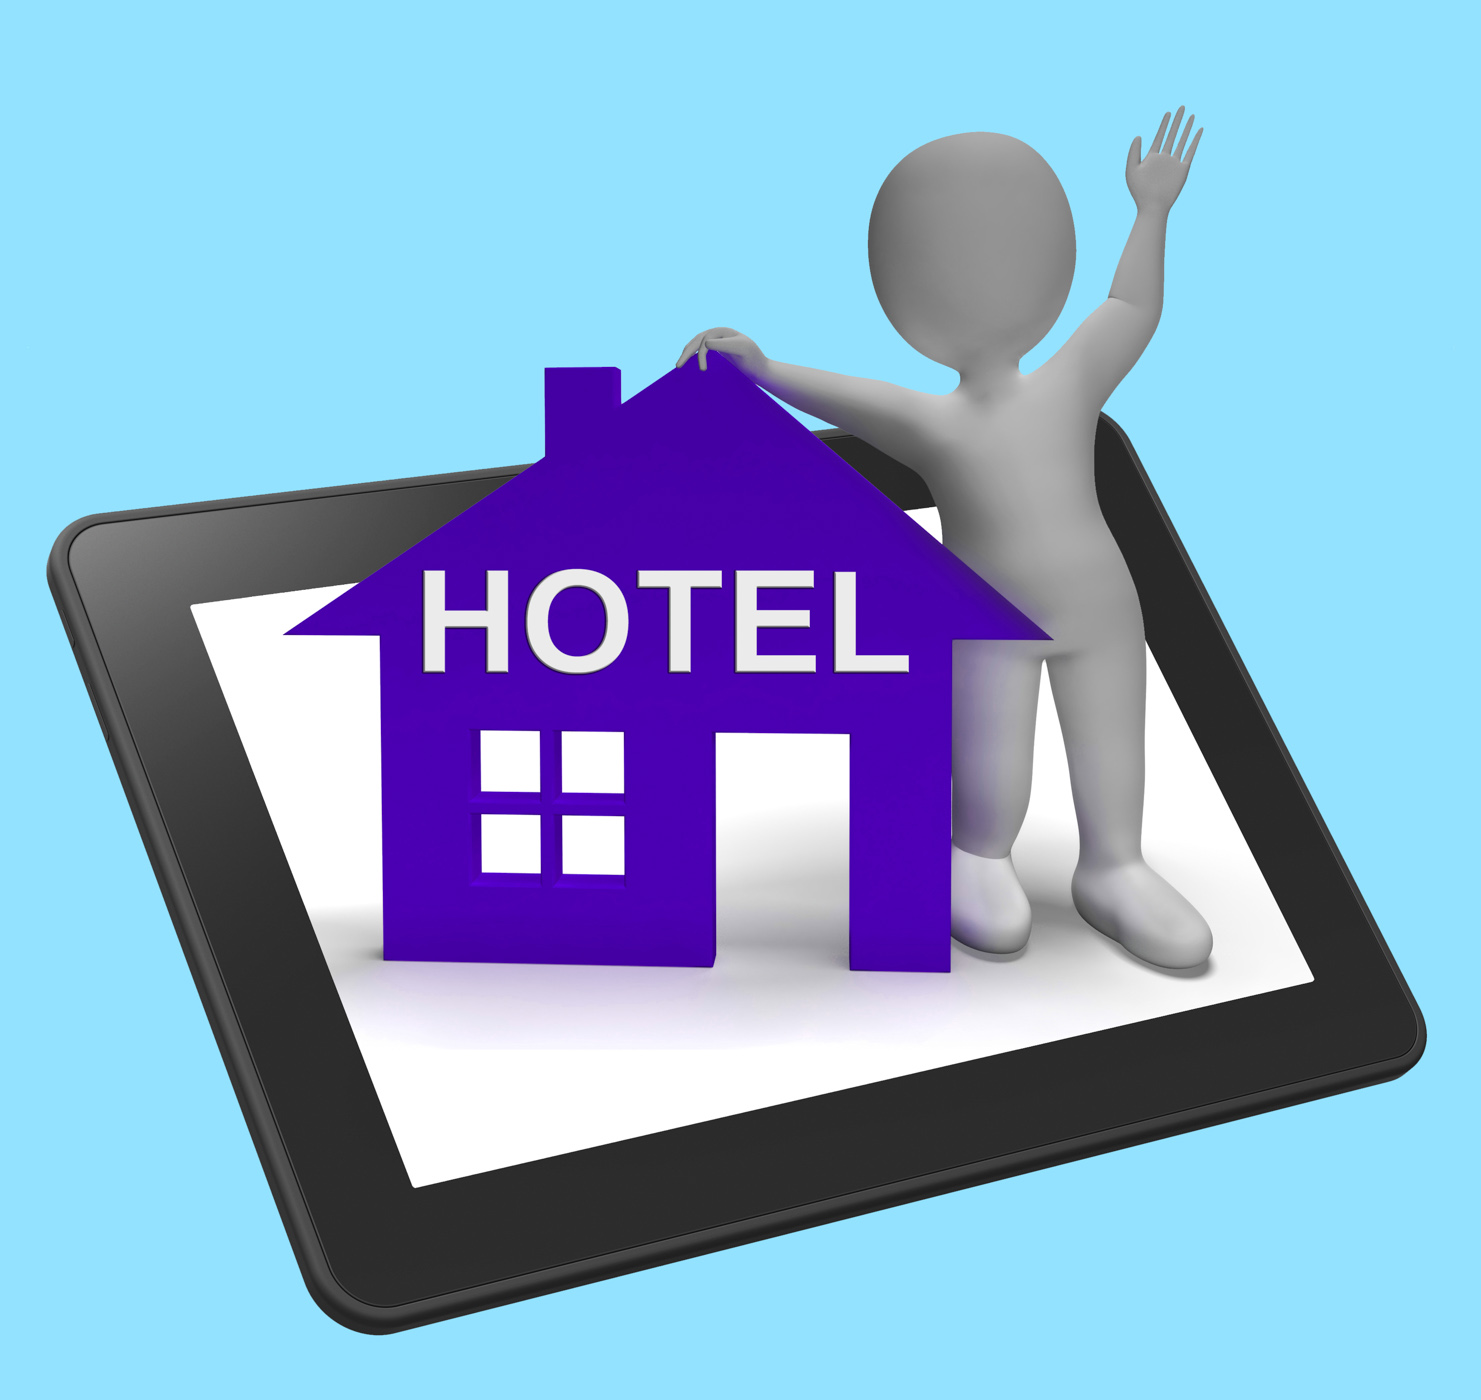 Hotel house tablet shows vacation accommodation and rooms photo